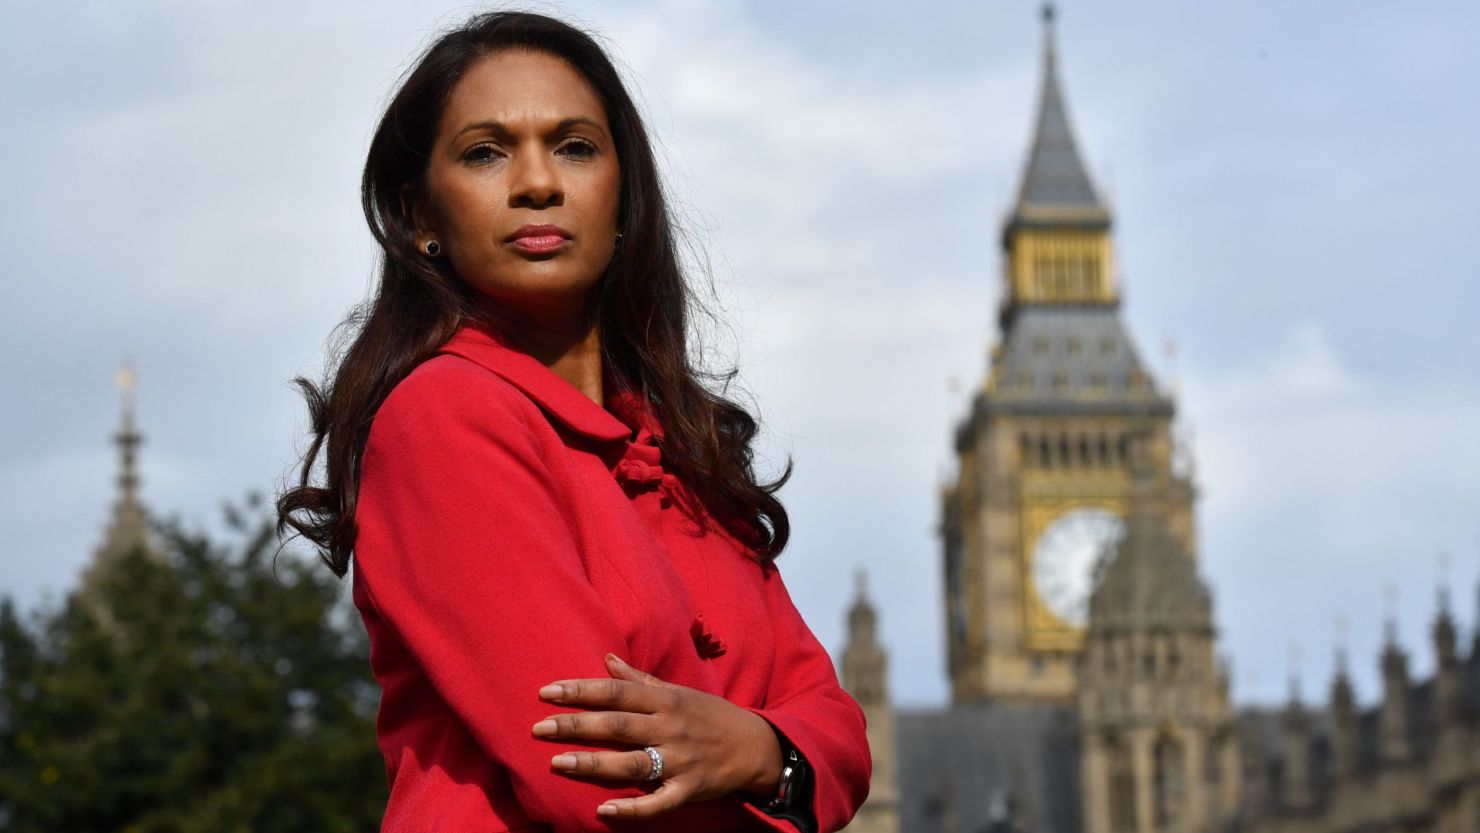 Gina Miller led a legal challenge against Prime Minister Theresa May's right to trigger Brexit negotiations without parliament's approval.